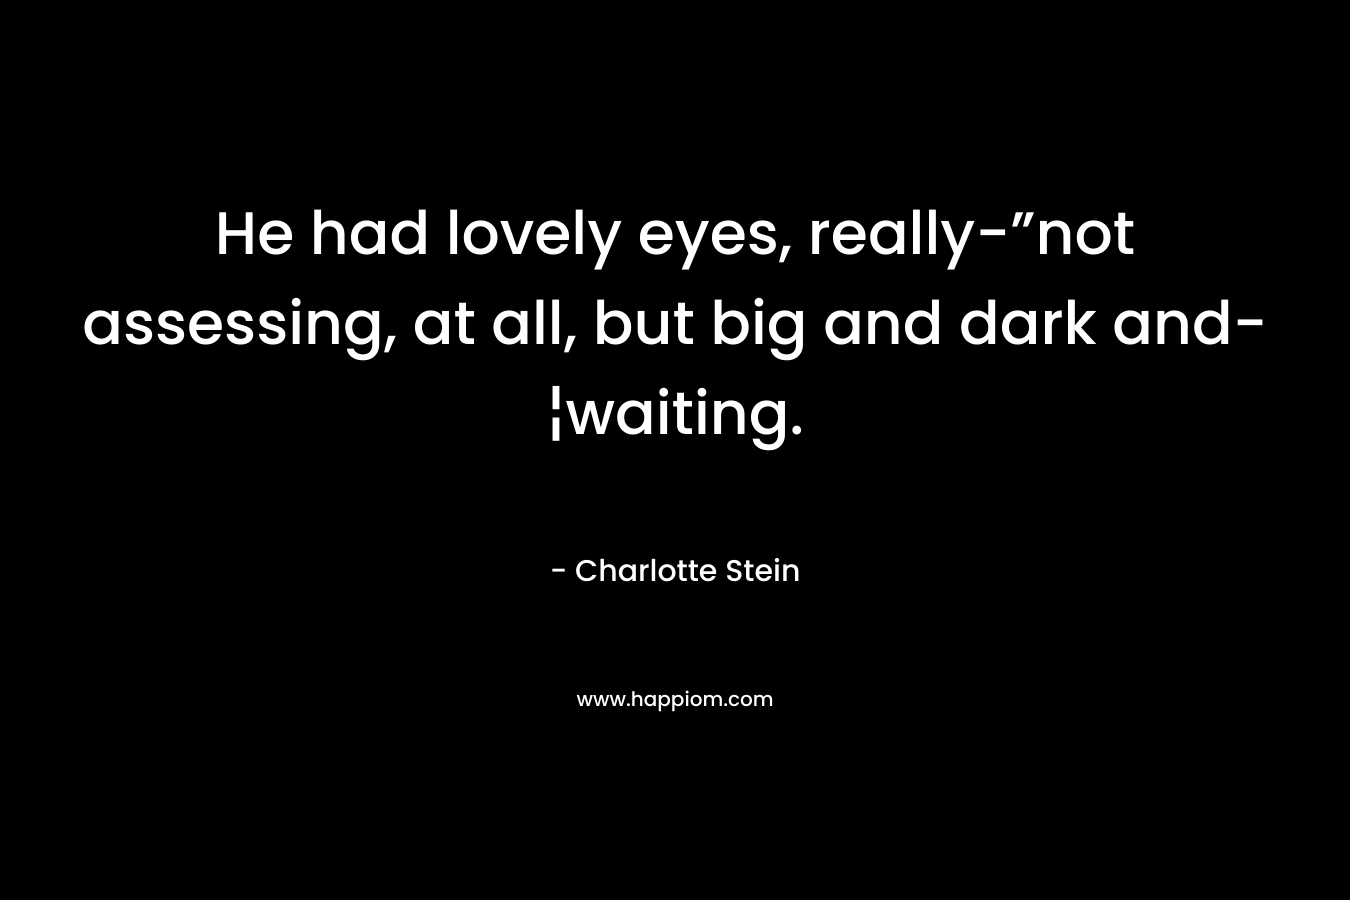 He had lovely eyes, really-”not assessing, at all, but big and dark and-¦waiting. – Charlotte Stein